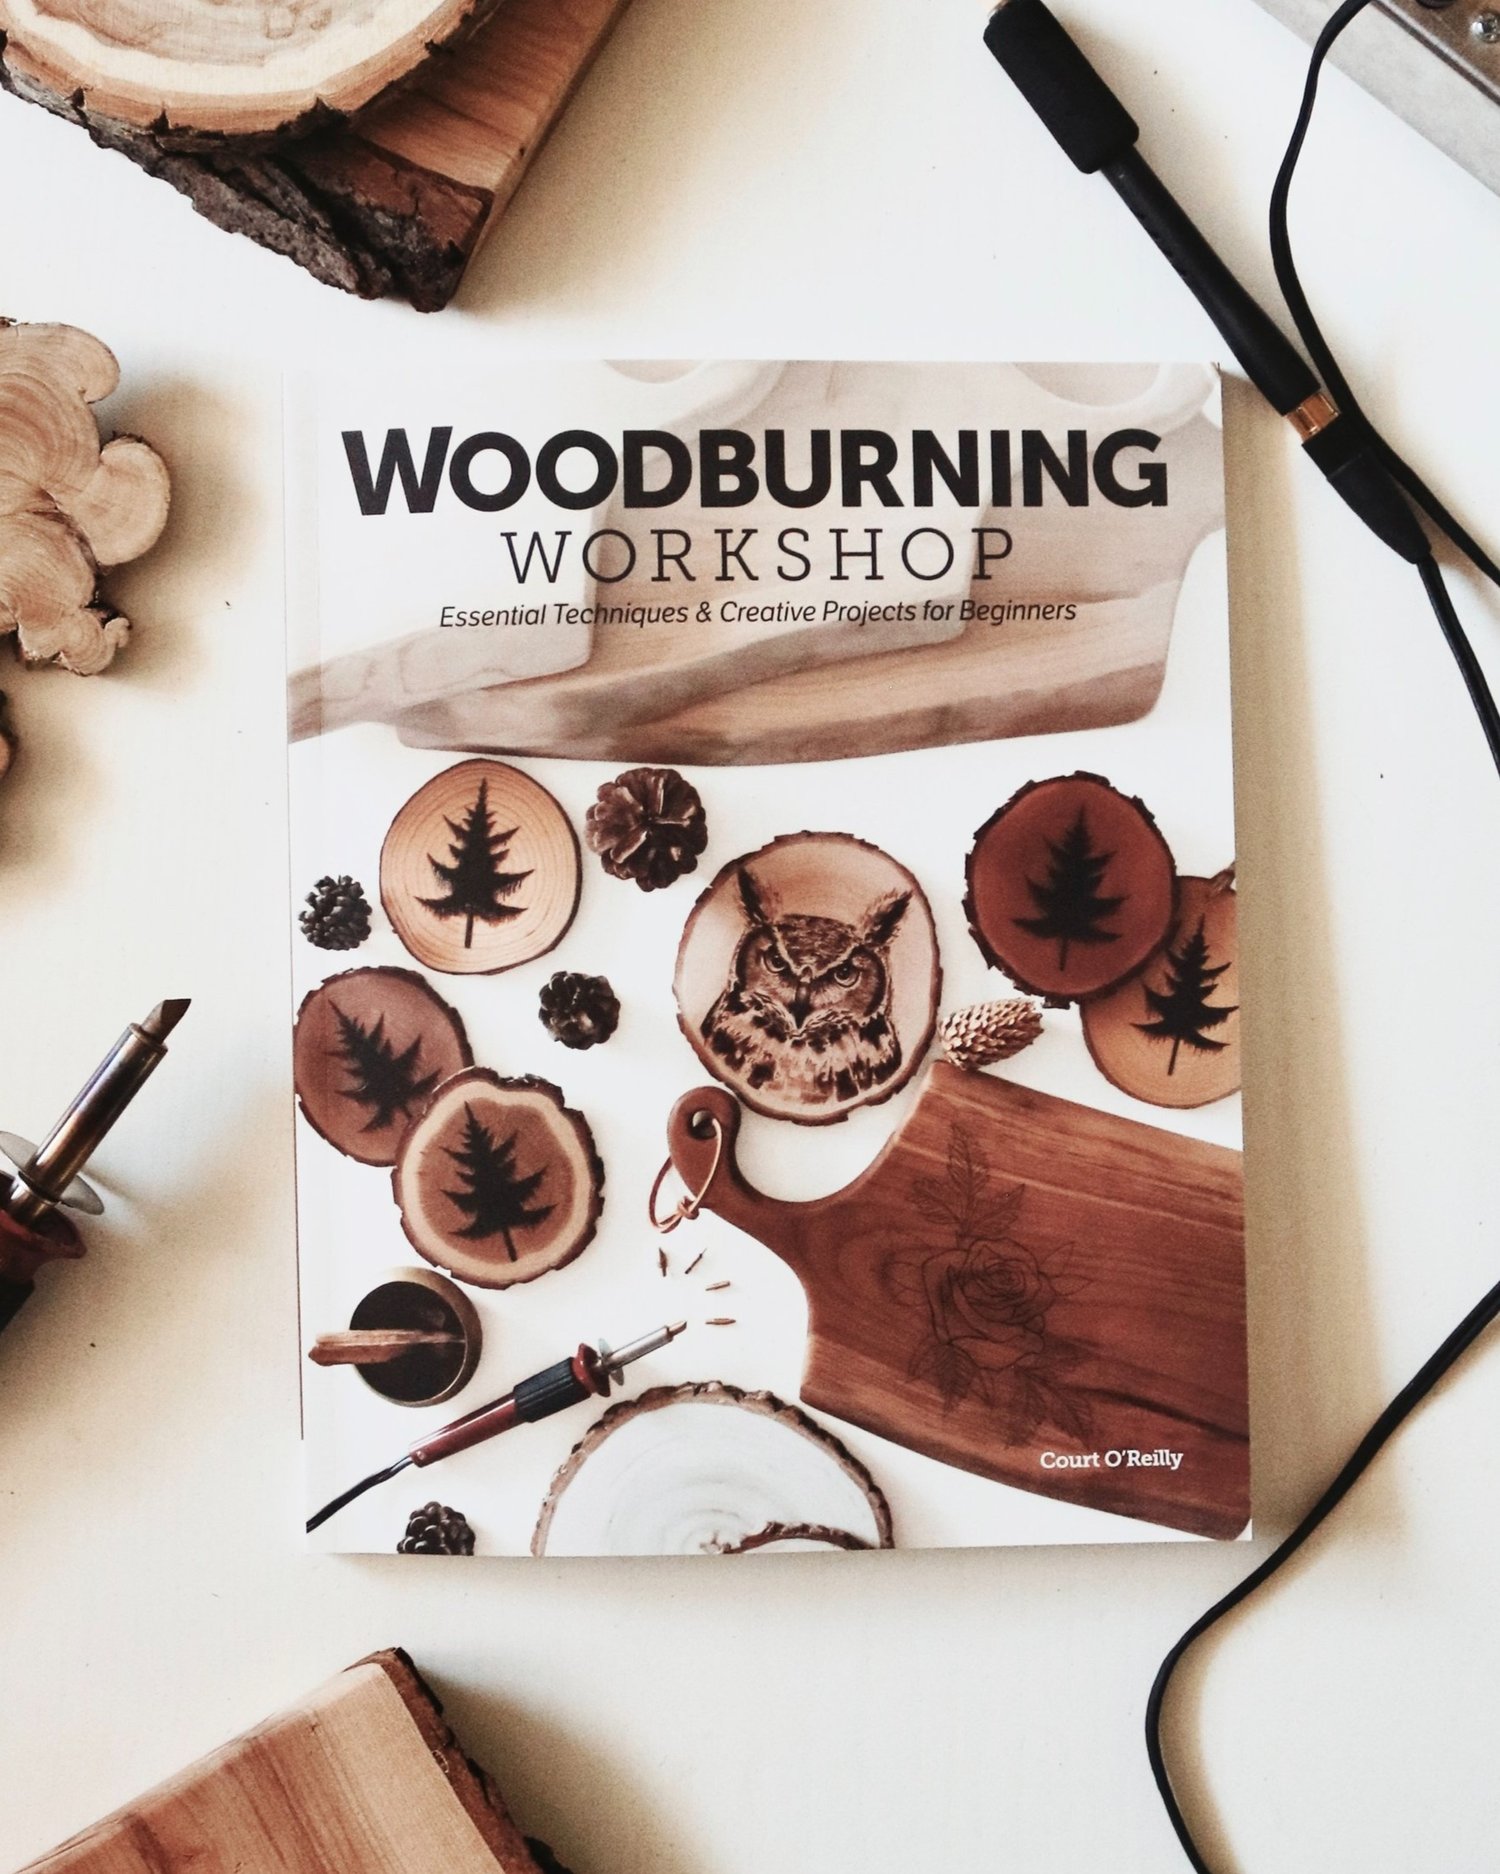 Discover the Art of Woodburning with the Plaid Woodburning Set